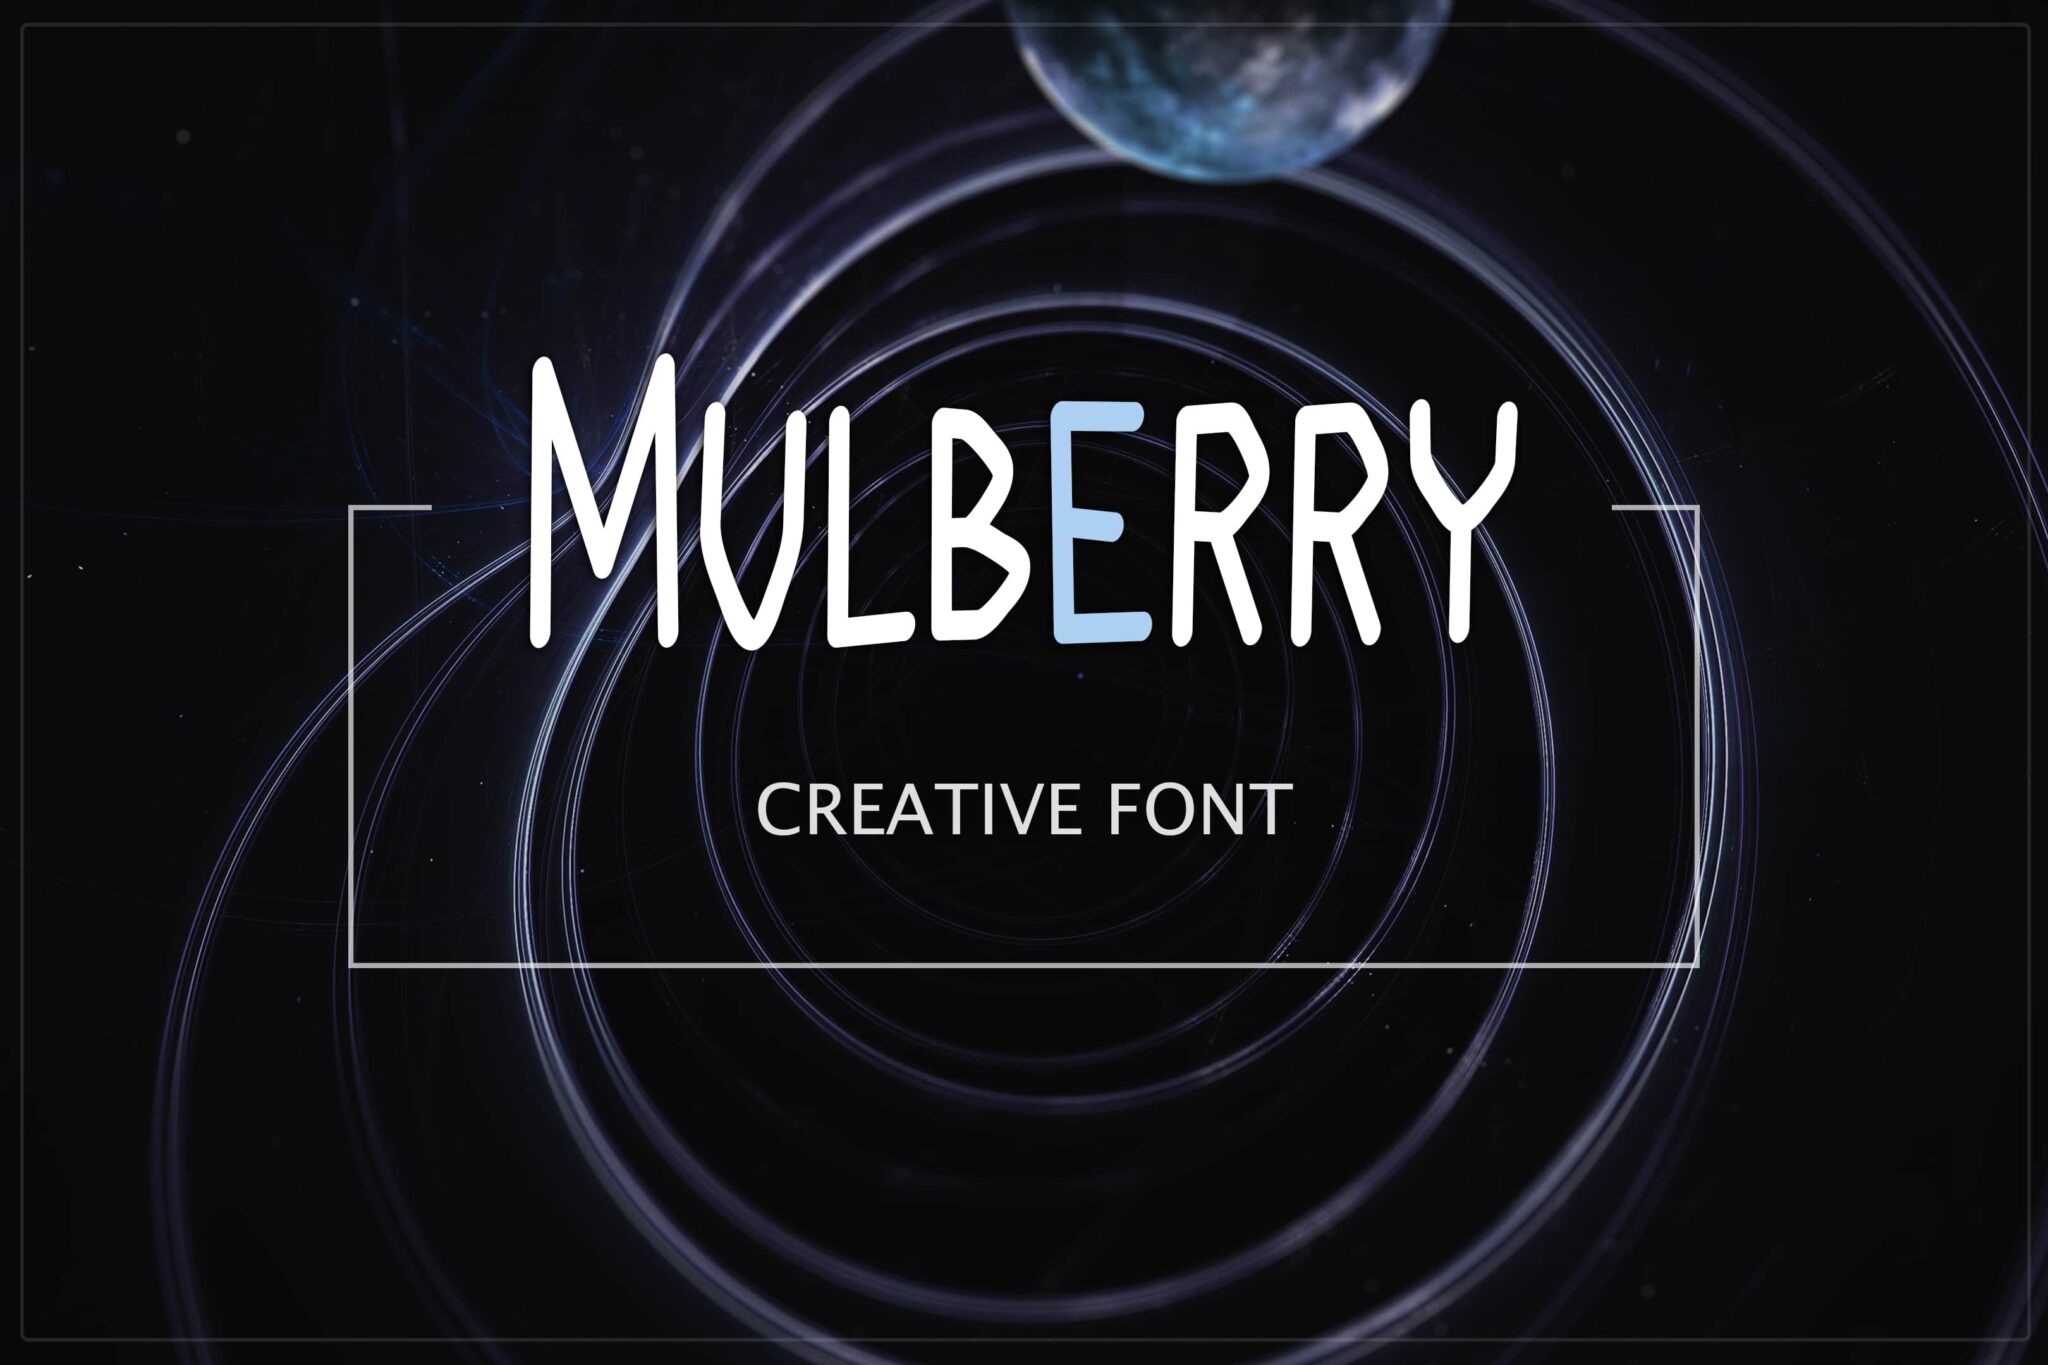 Cool font in a space style.